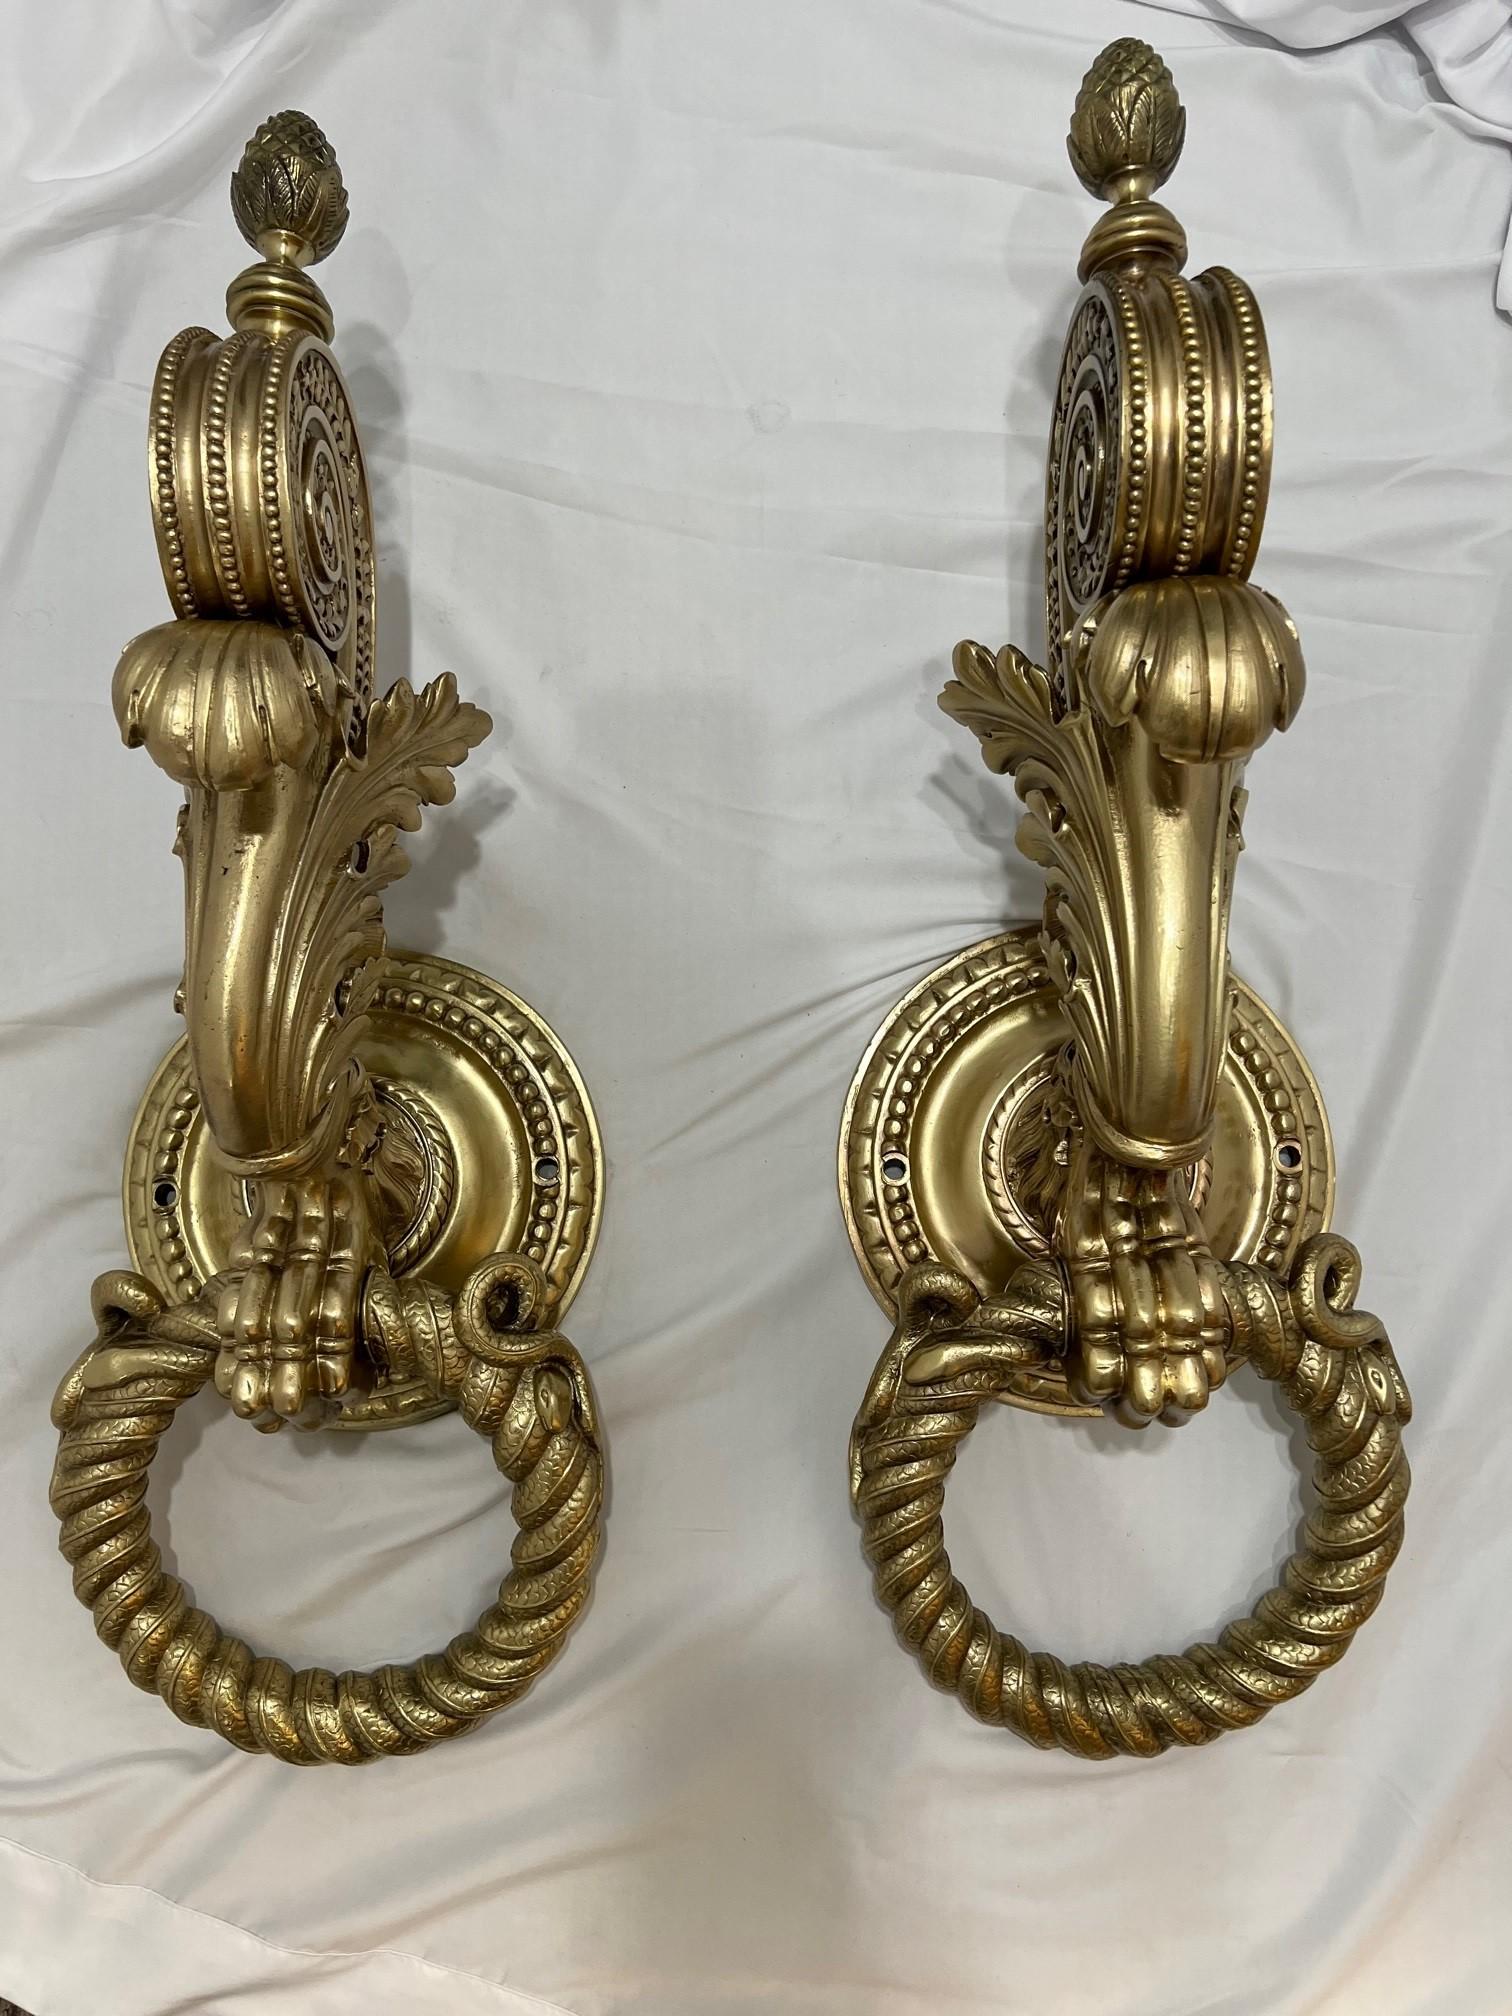 Mid to late 19th century monumental antique architectural pair of bronze door knockers, the largest I have even seen. This amazing pair of door knockers with its beautiful and intricate detailing have been professionally polished back to its